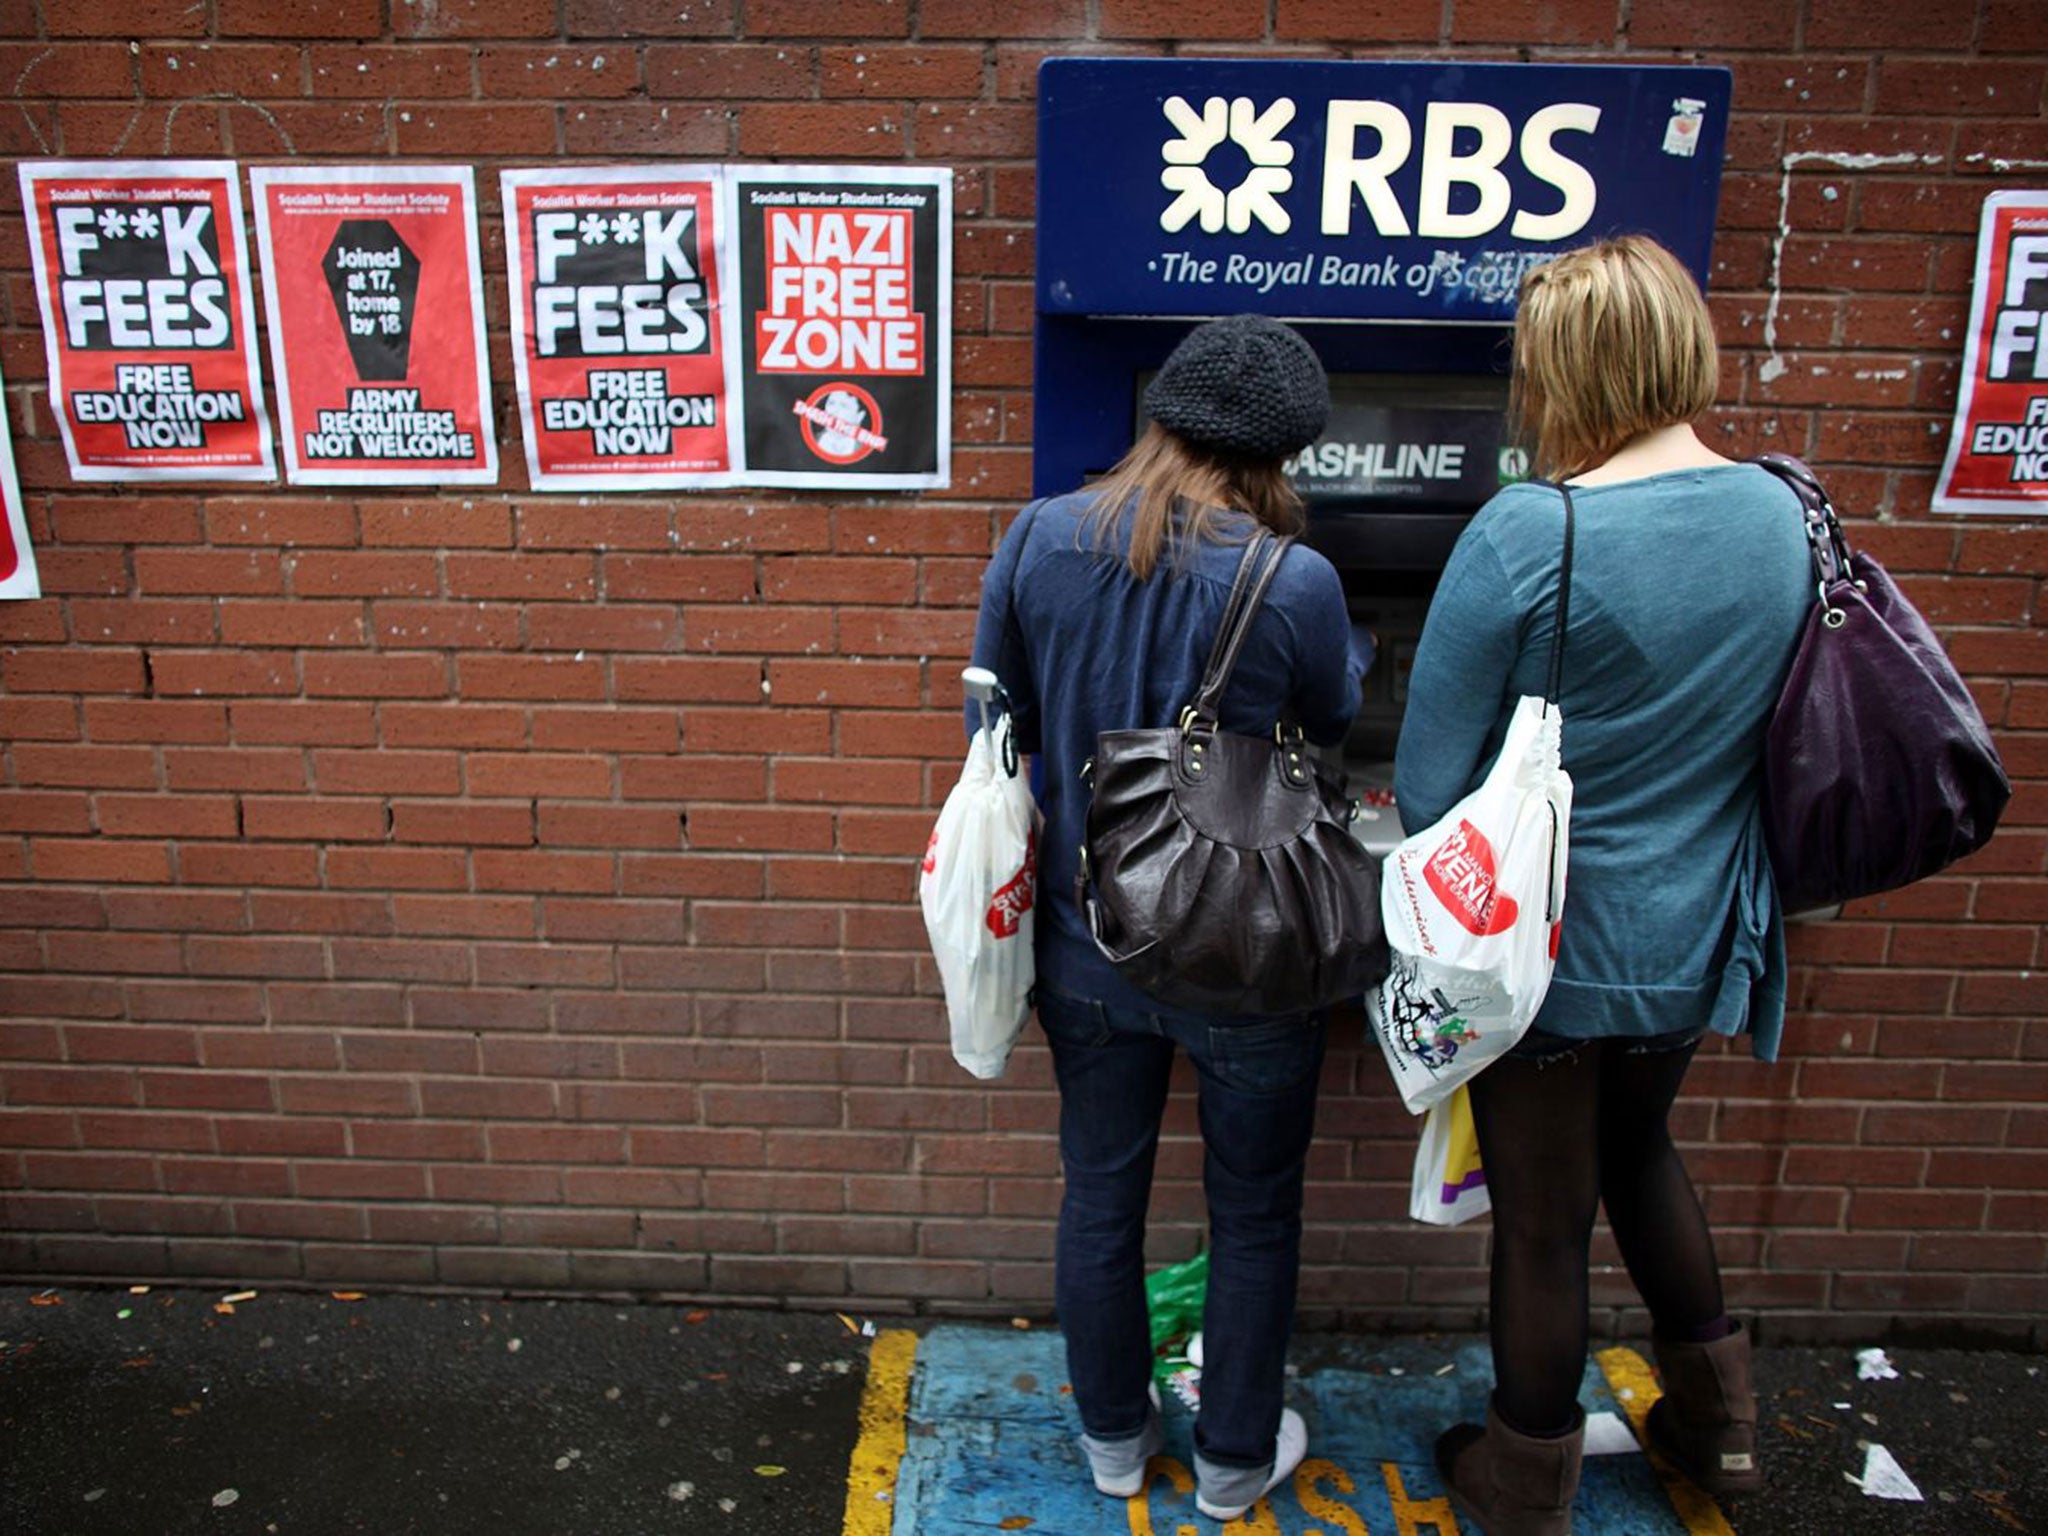 Students arriving for Manchester University's freshers week queue up at a cash machine